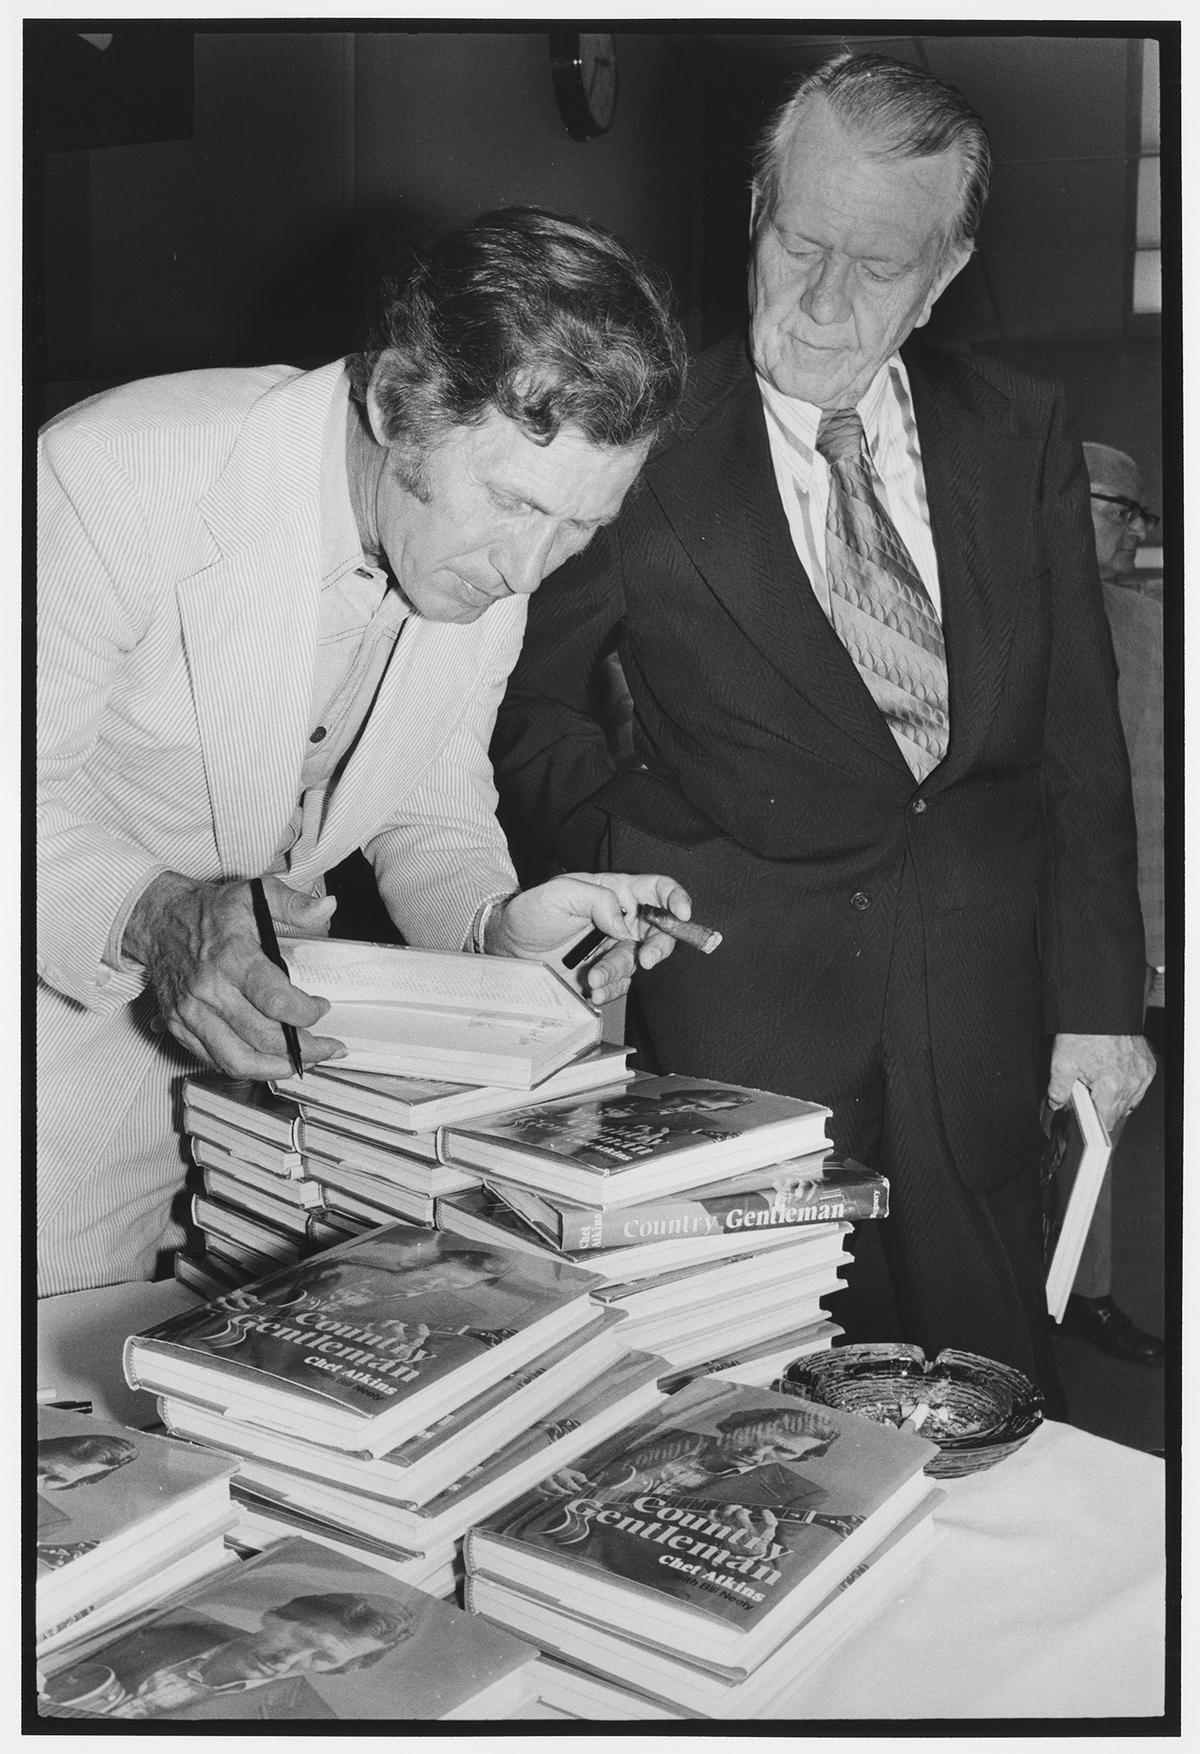 Country musician Chet Atkins signing a copy of his book "Country Gentleman." (Public Domain)